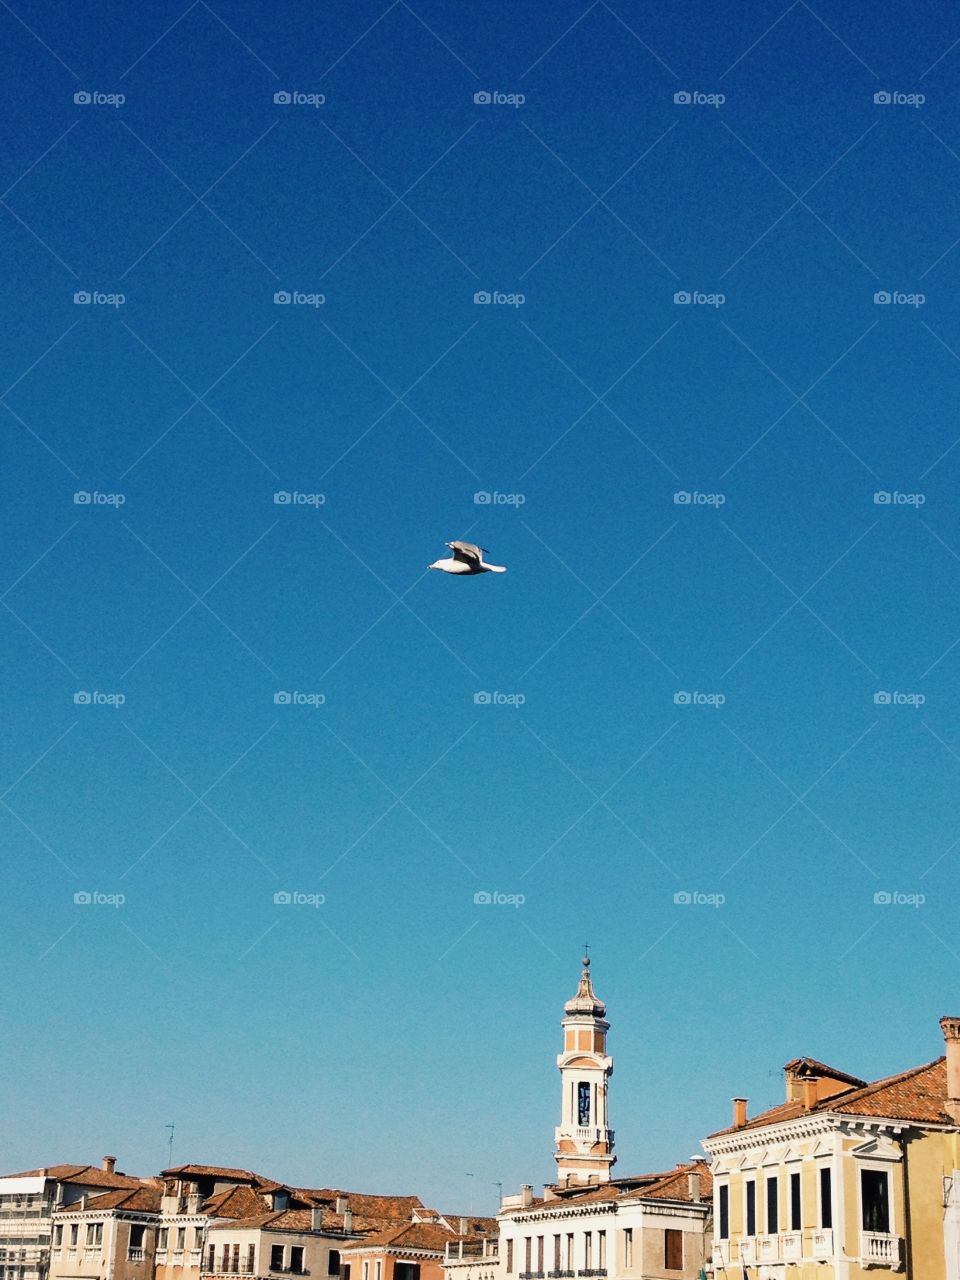 A Seagull Flying Freely . A seagull shot flying over one of Venice's channels on a sunny winter day.